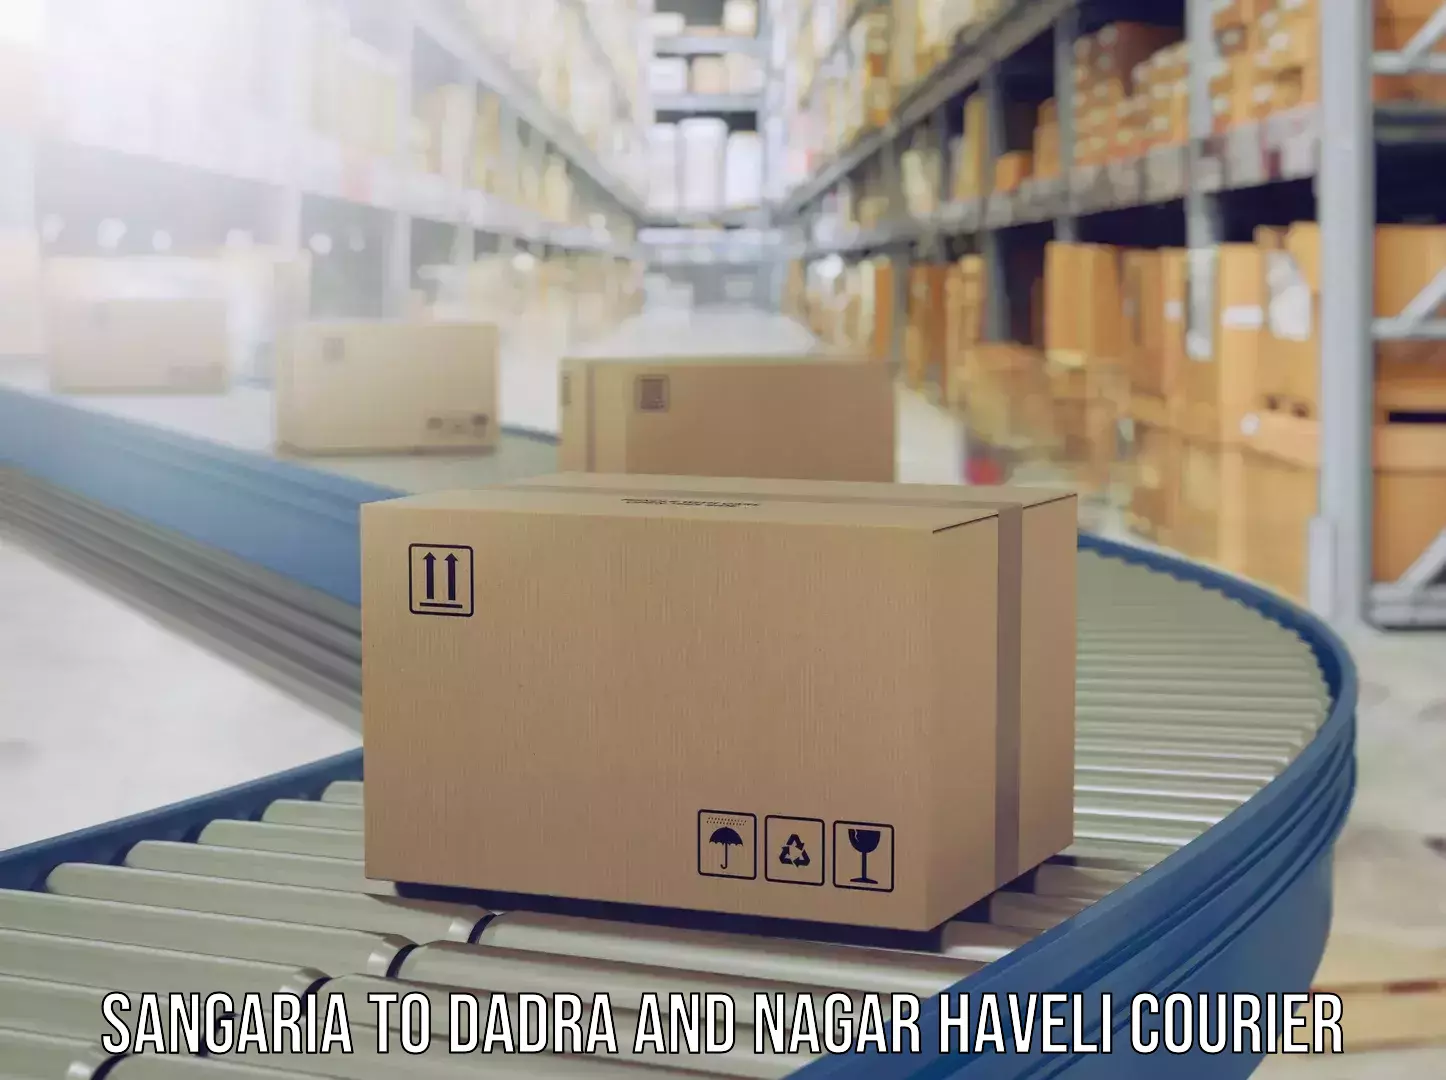 Automated luggage transport in Sangaria to Dadra and Nagar Haveli